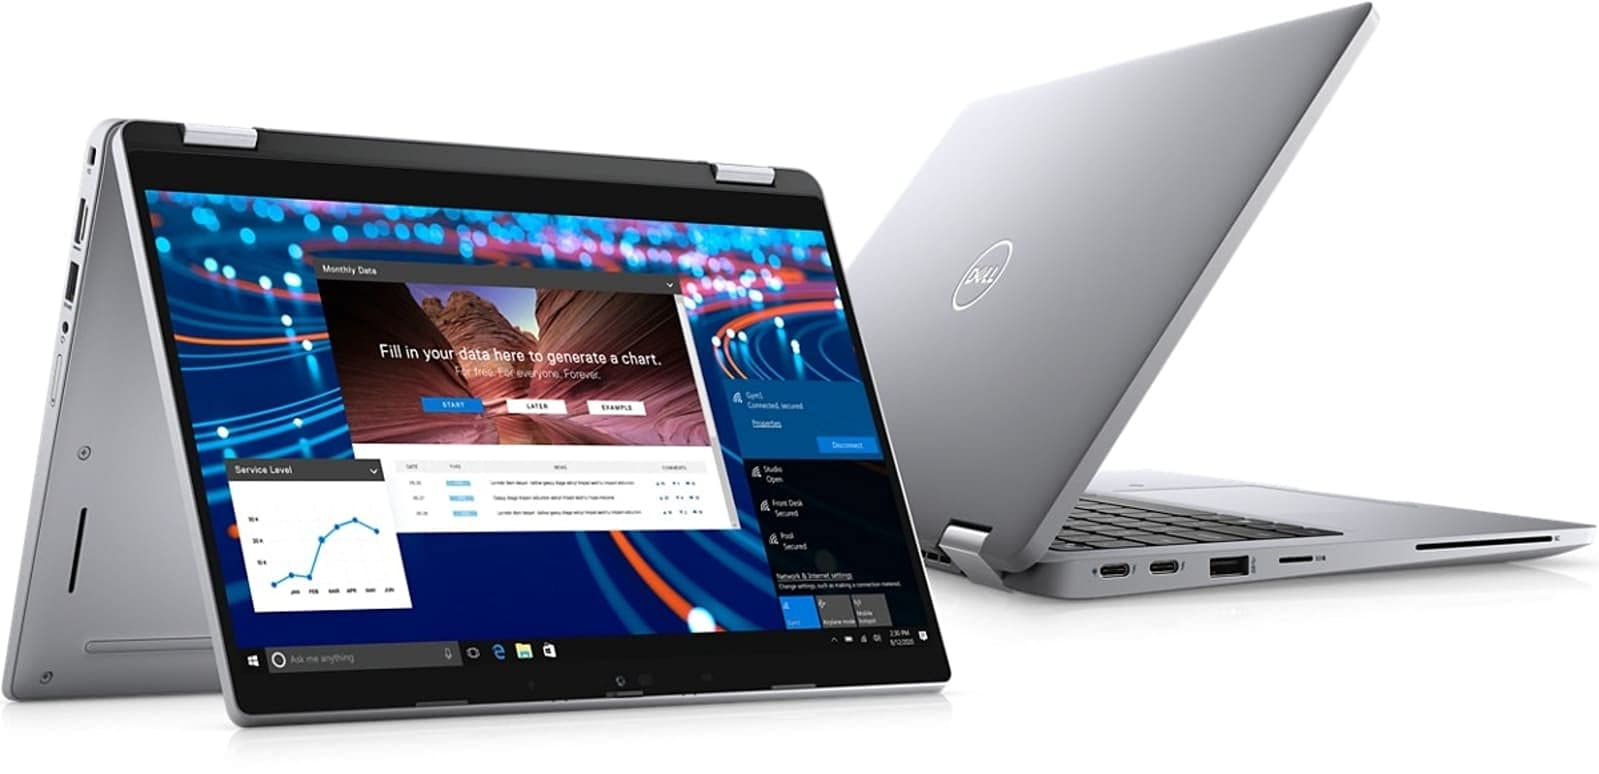 Dell Latitude 5000 5320 2-in-1 (2021) | 13.3" FHD Touch | Core i7 - 512GB SSD - 32GB RAM | 4 Cores @ 4.4 GHz - 11th Gen CPU Win 11 Pro (Renewed)